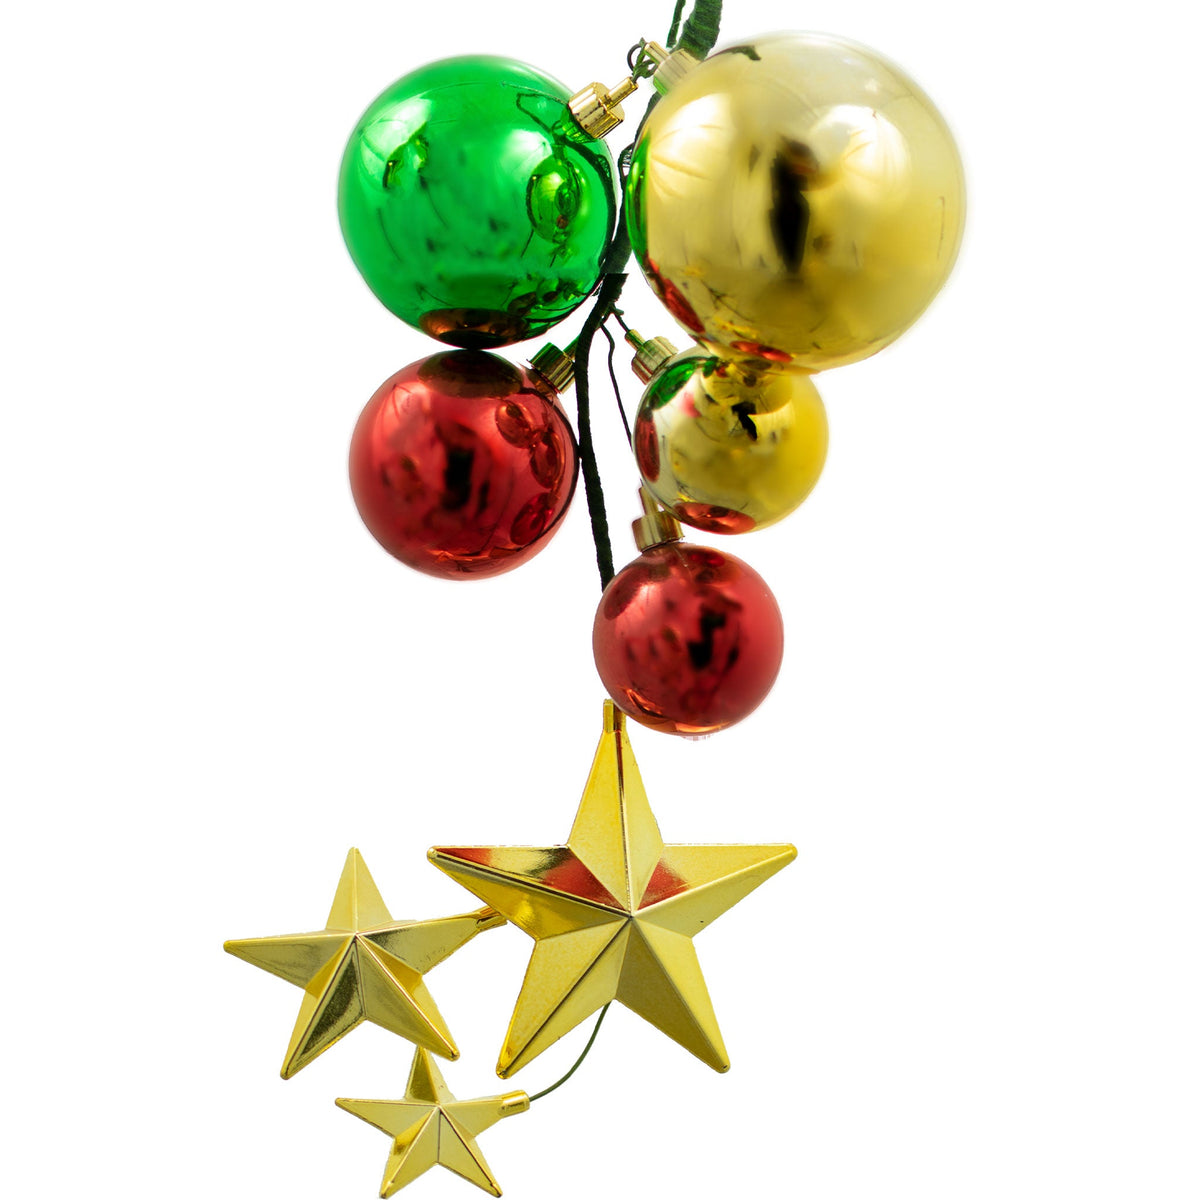 Colors include:  2 - Shiny Red Ball Ornaments (60MM & 50MM) 2 - Shiny Gold Ball Ornaments (80MM & 50MM) 1 - Shiny Green Ball Ornament (70MM) 3 - Shiny Gold Stars